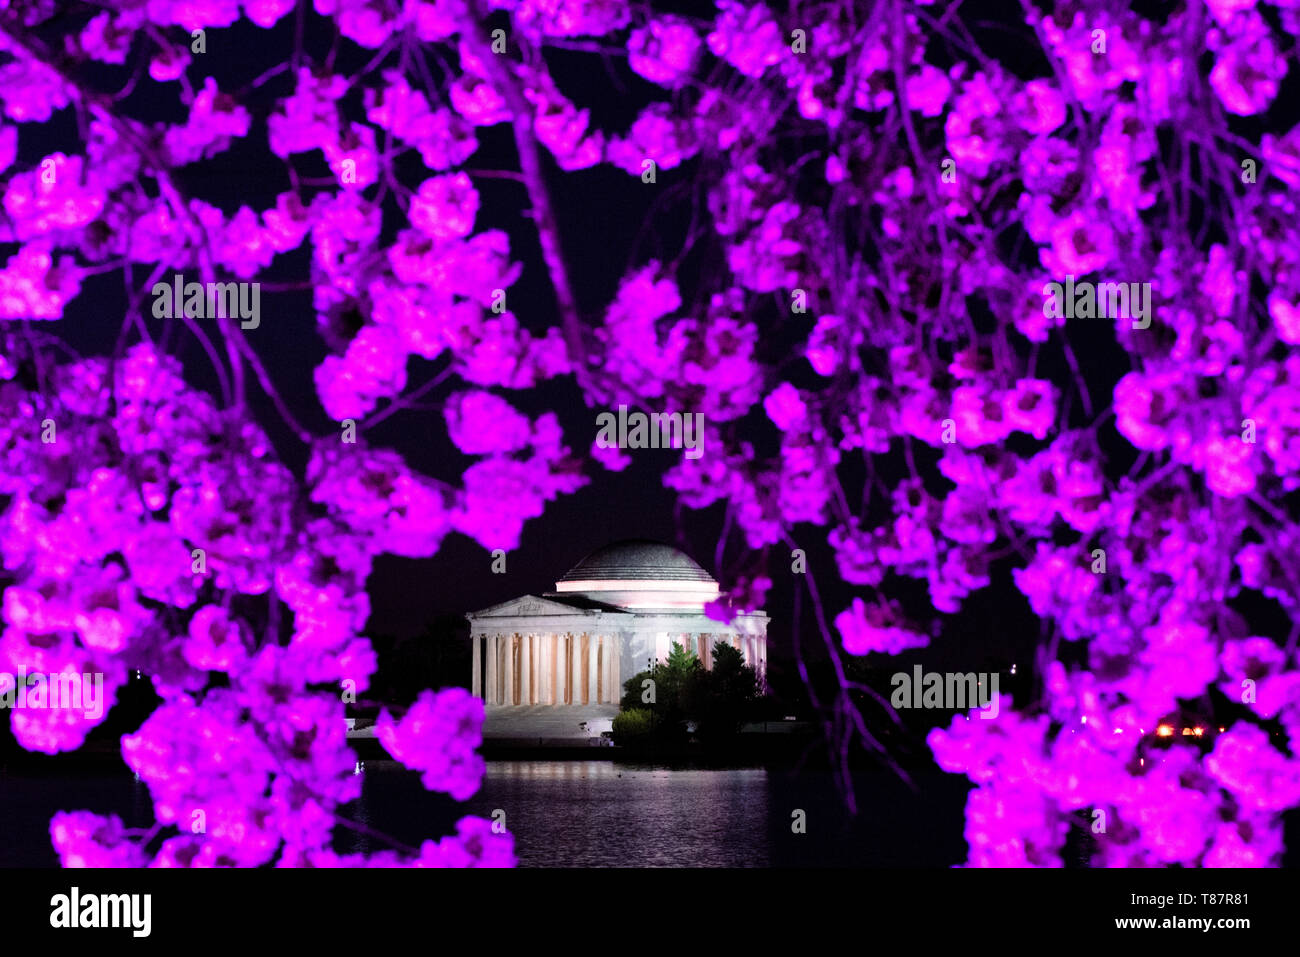 WASHINGTON, DC - The Jefferson Memorial framed by cherry blossoms in full bloom and illuminated by pink lights. The annual flowering of thousands of cherry trees around and near monuments of the Tidal Basin in Washington DC is a major tourist attraction. The bloom is only fleeting, and the precise timing changes year to year depending on the weather in the months leading up to it. Stock Photo